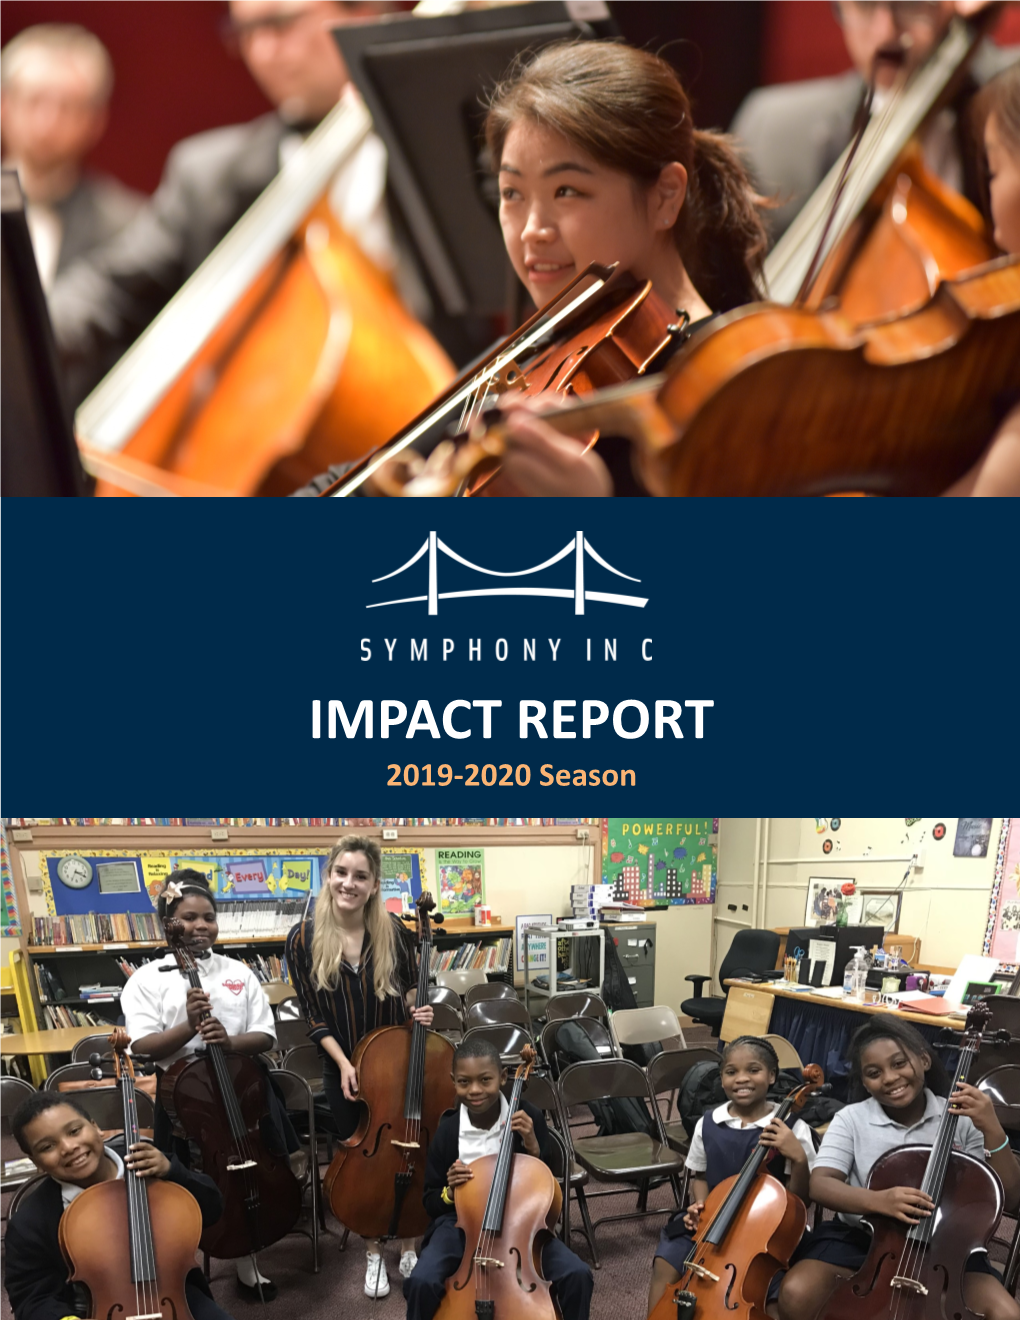 IMPACT REPORT 2019-2020 Season a Message from Our Board Chair